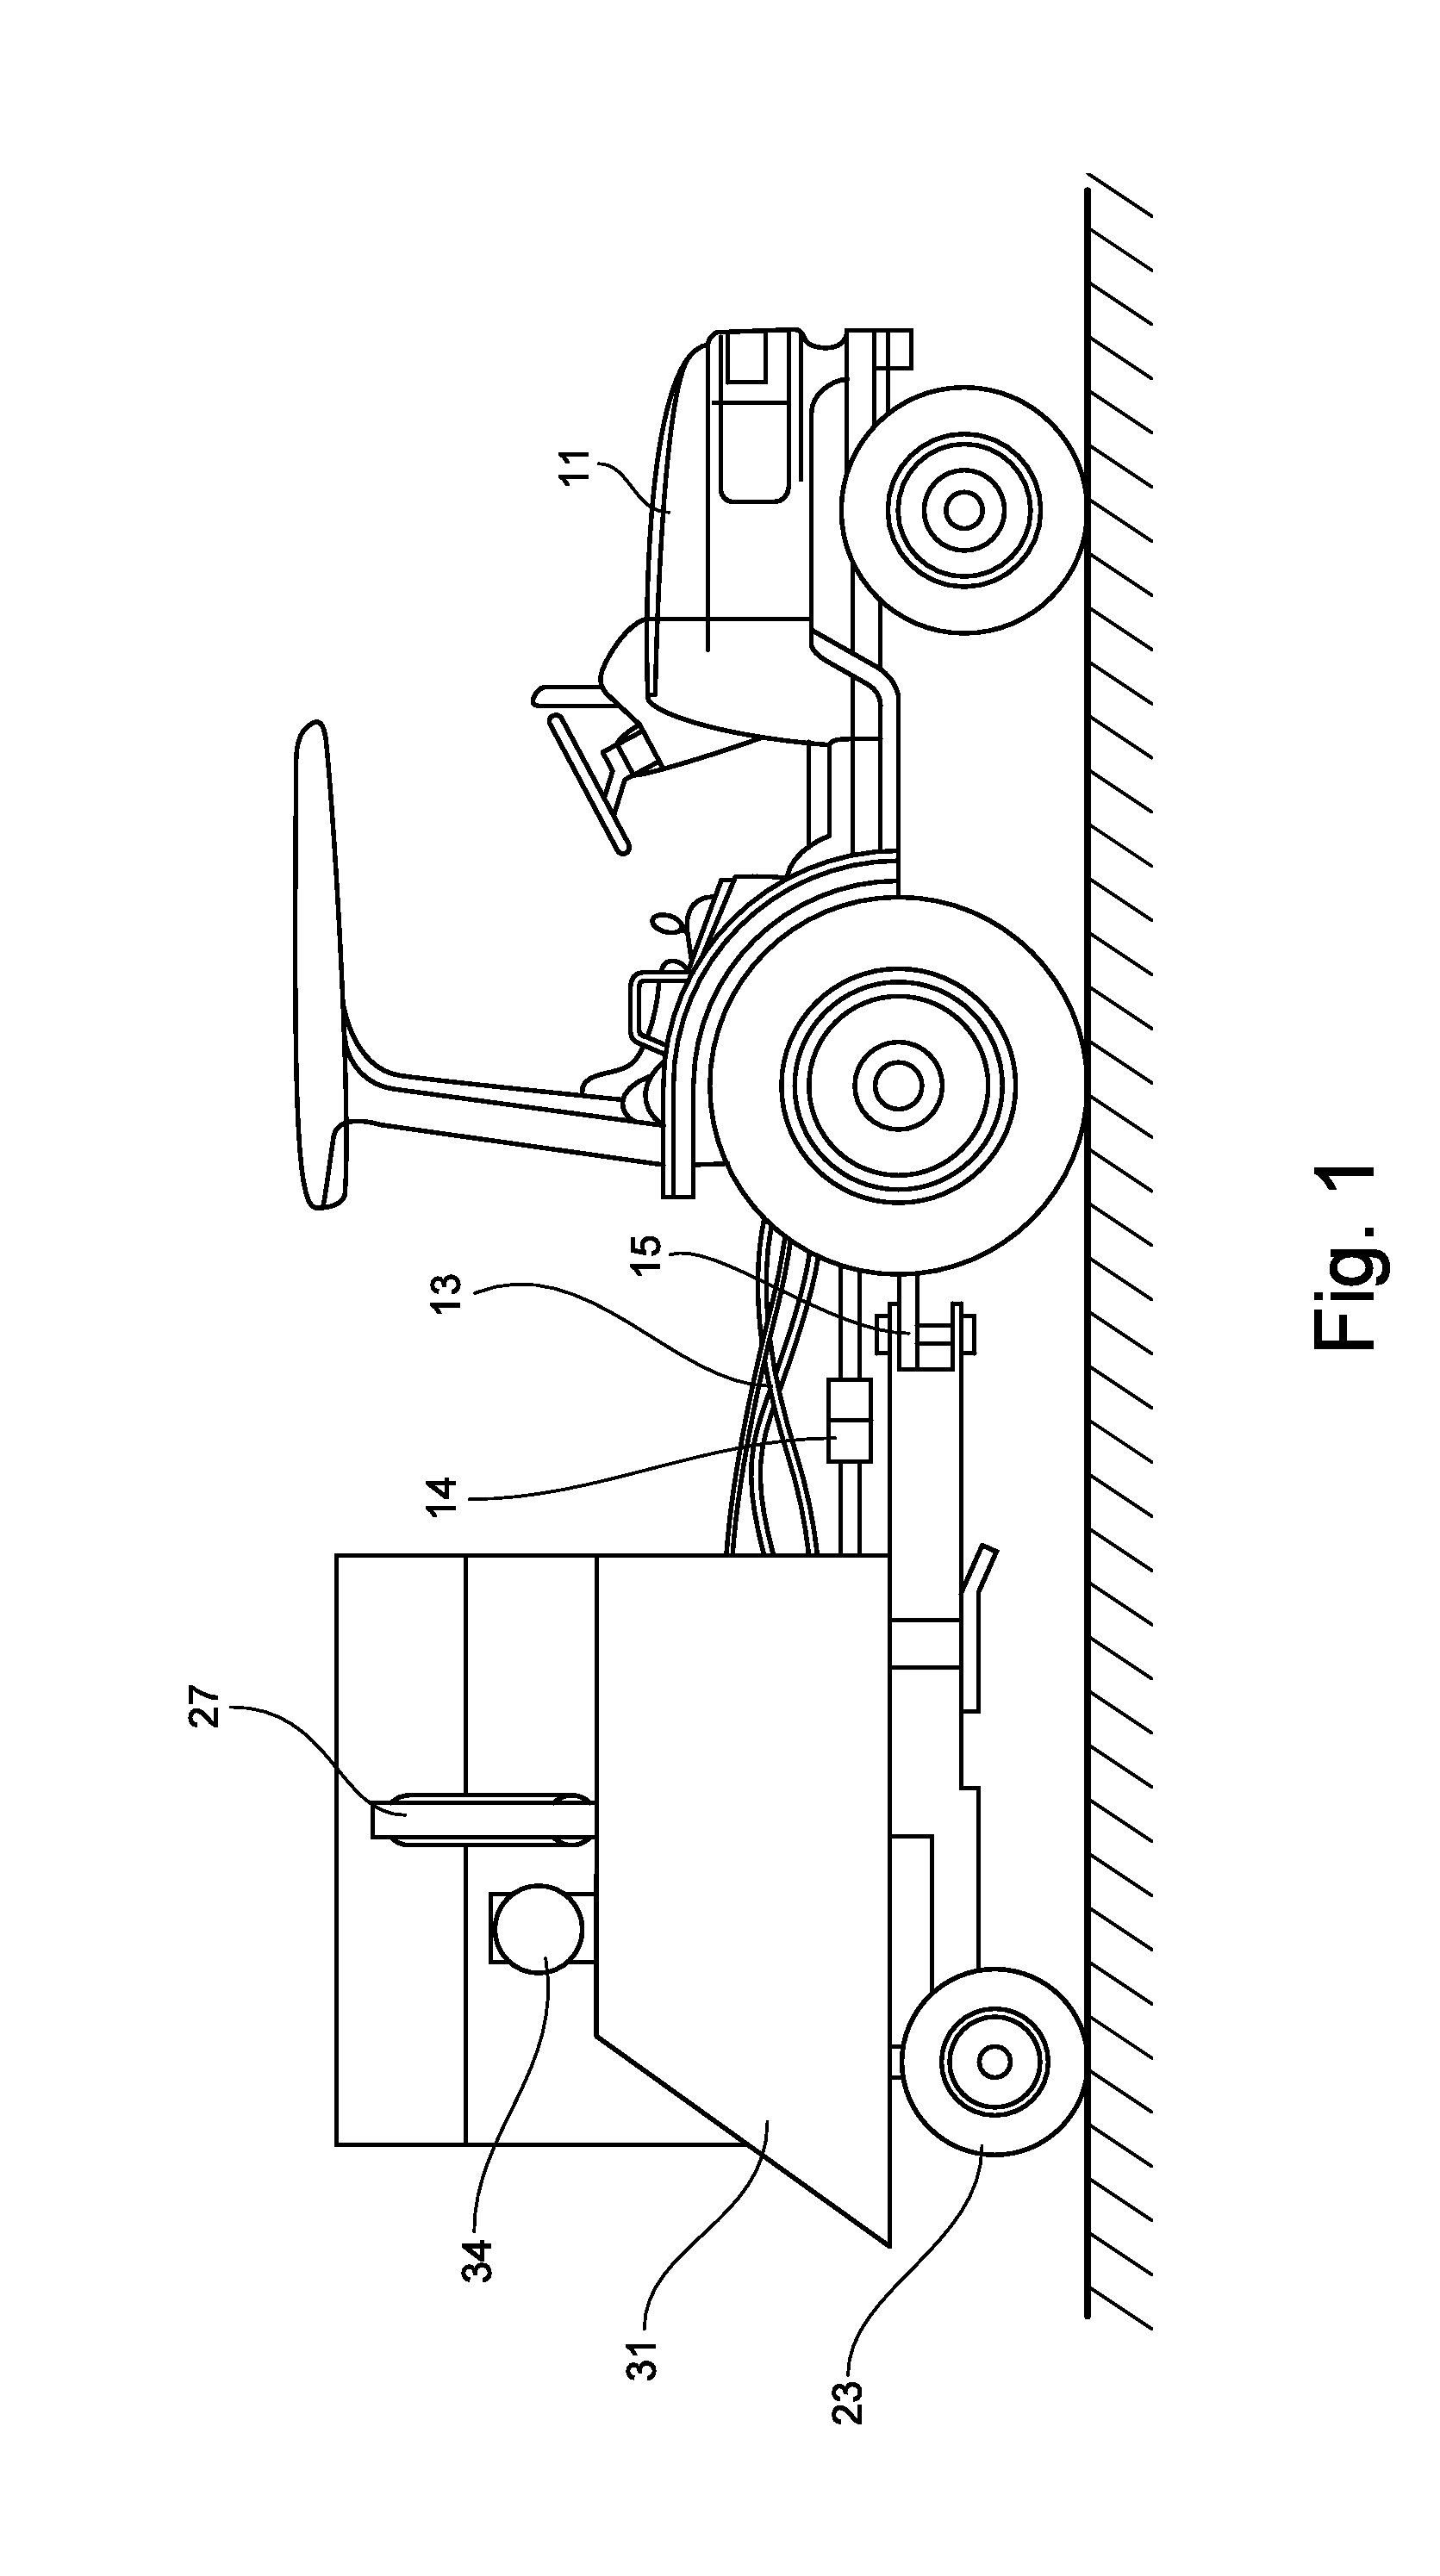 Method and Apparatus for Coating Pine Straw